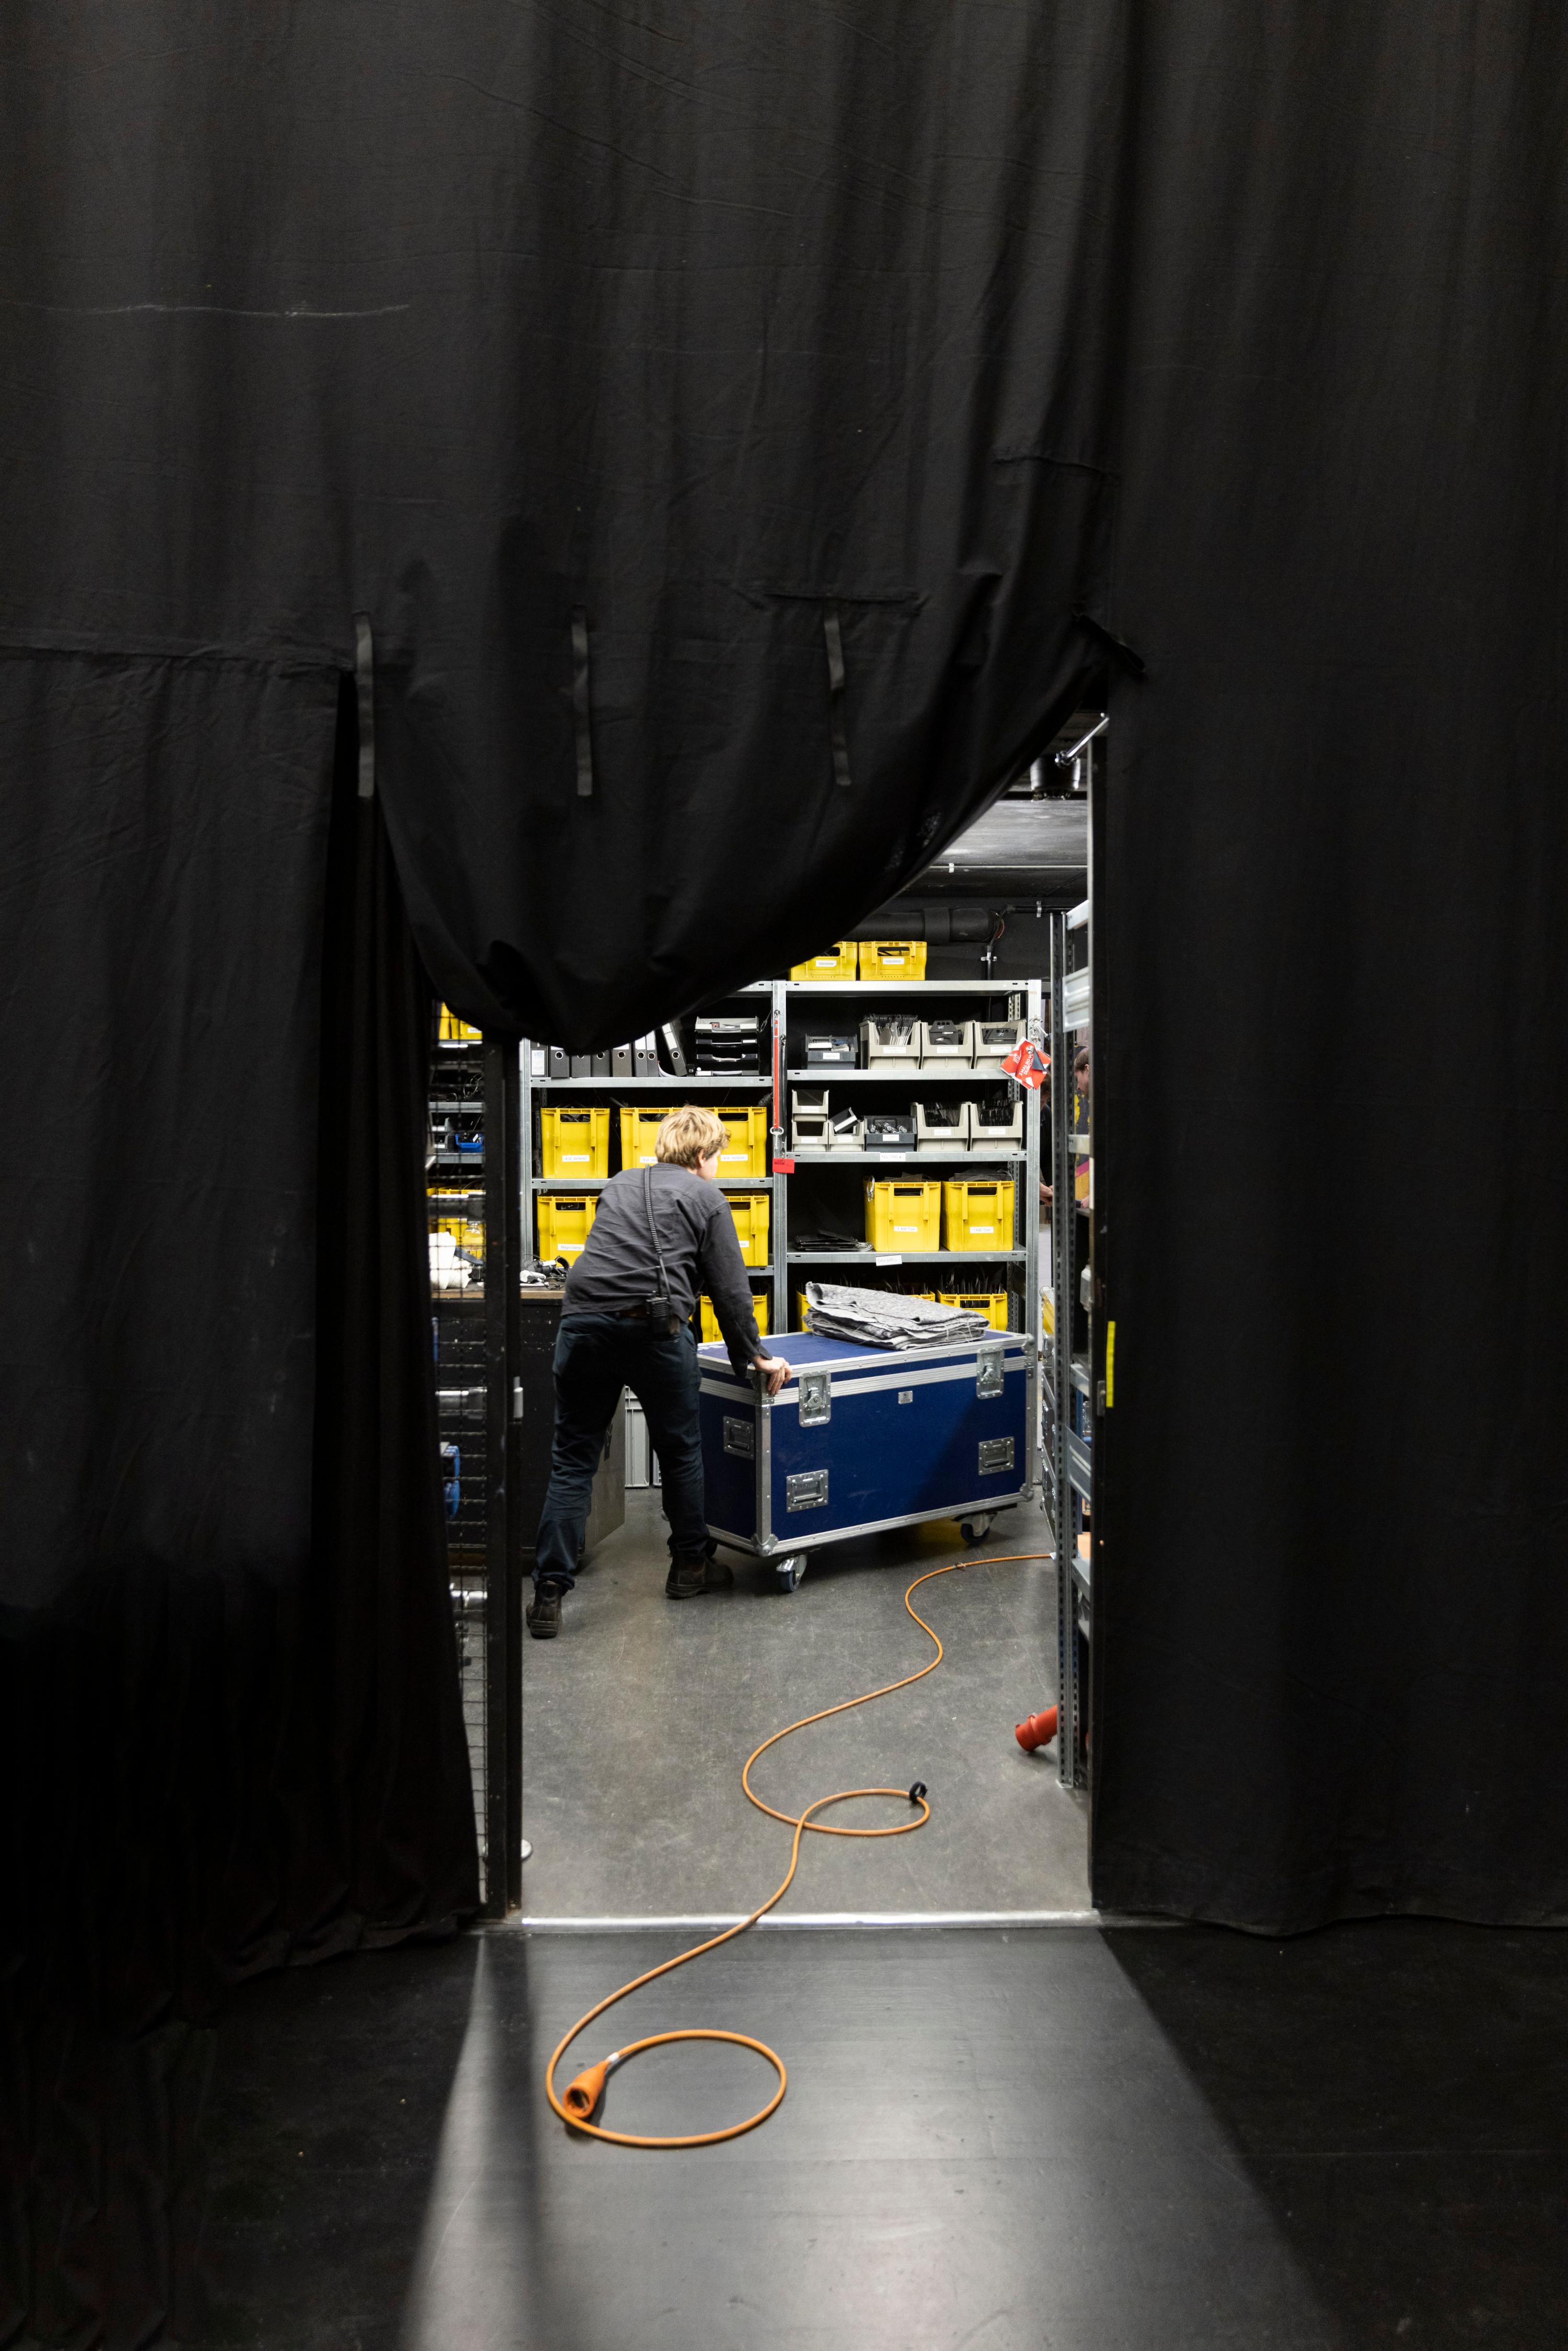 A person pushes a container in a small room. The entrance to the room is flanked by a black curtain.